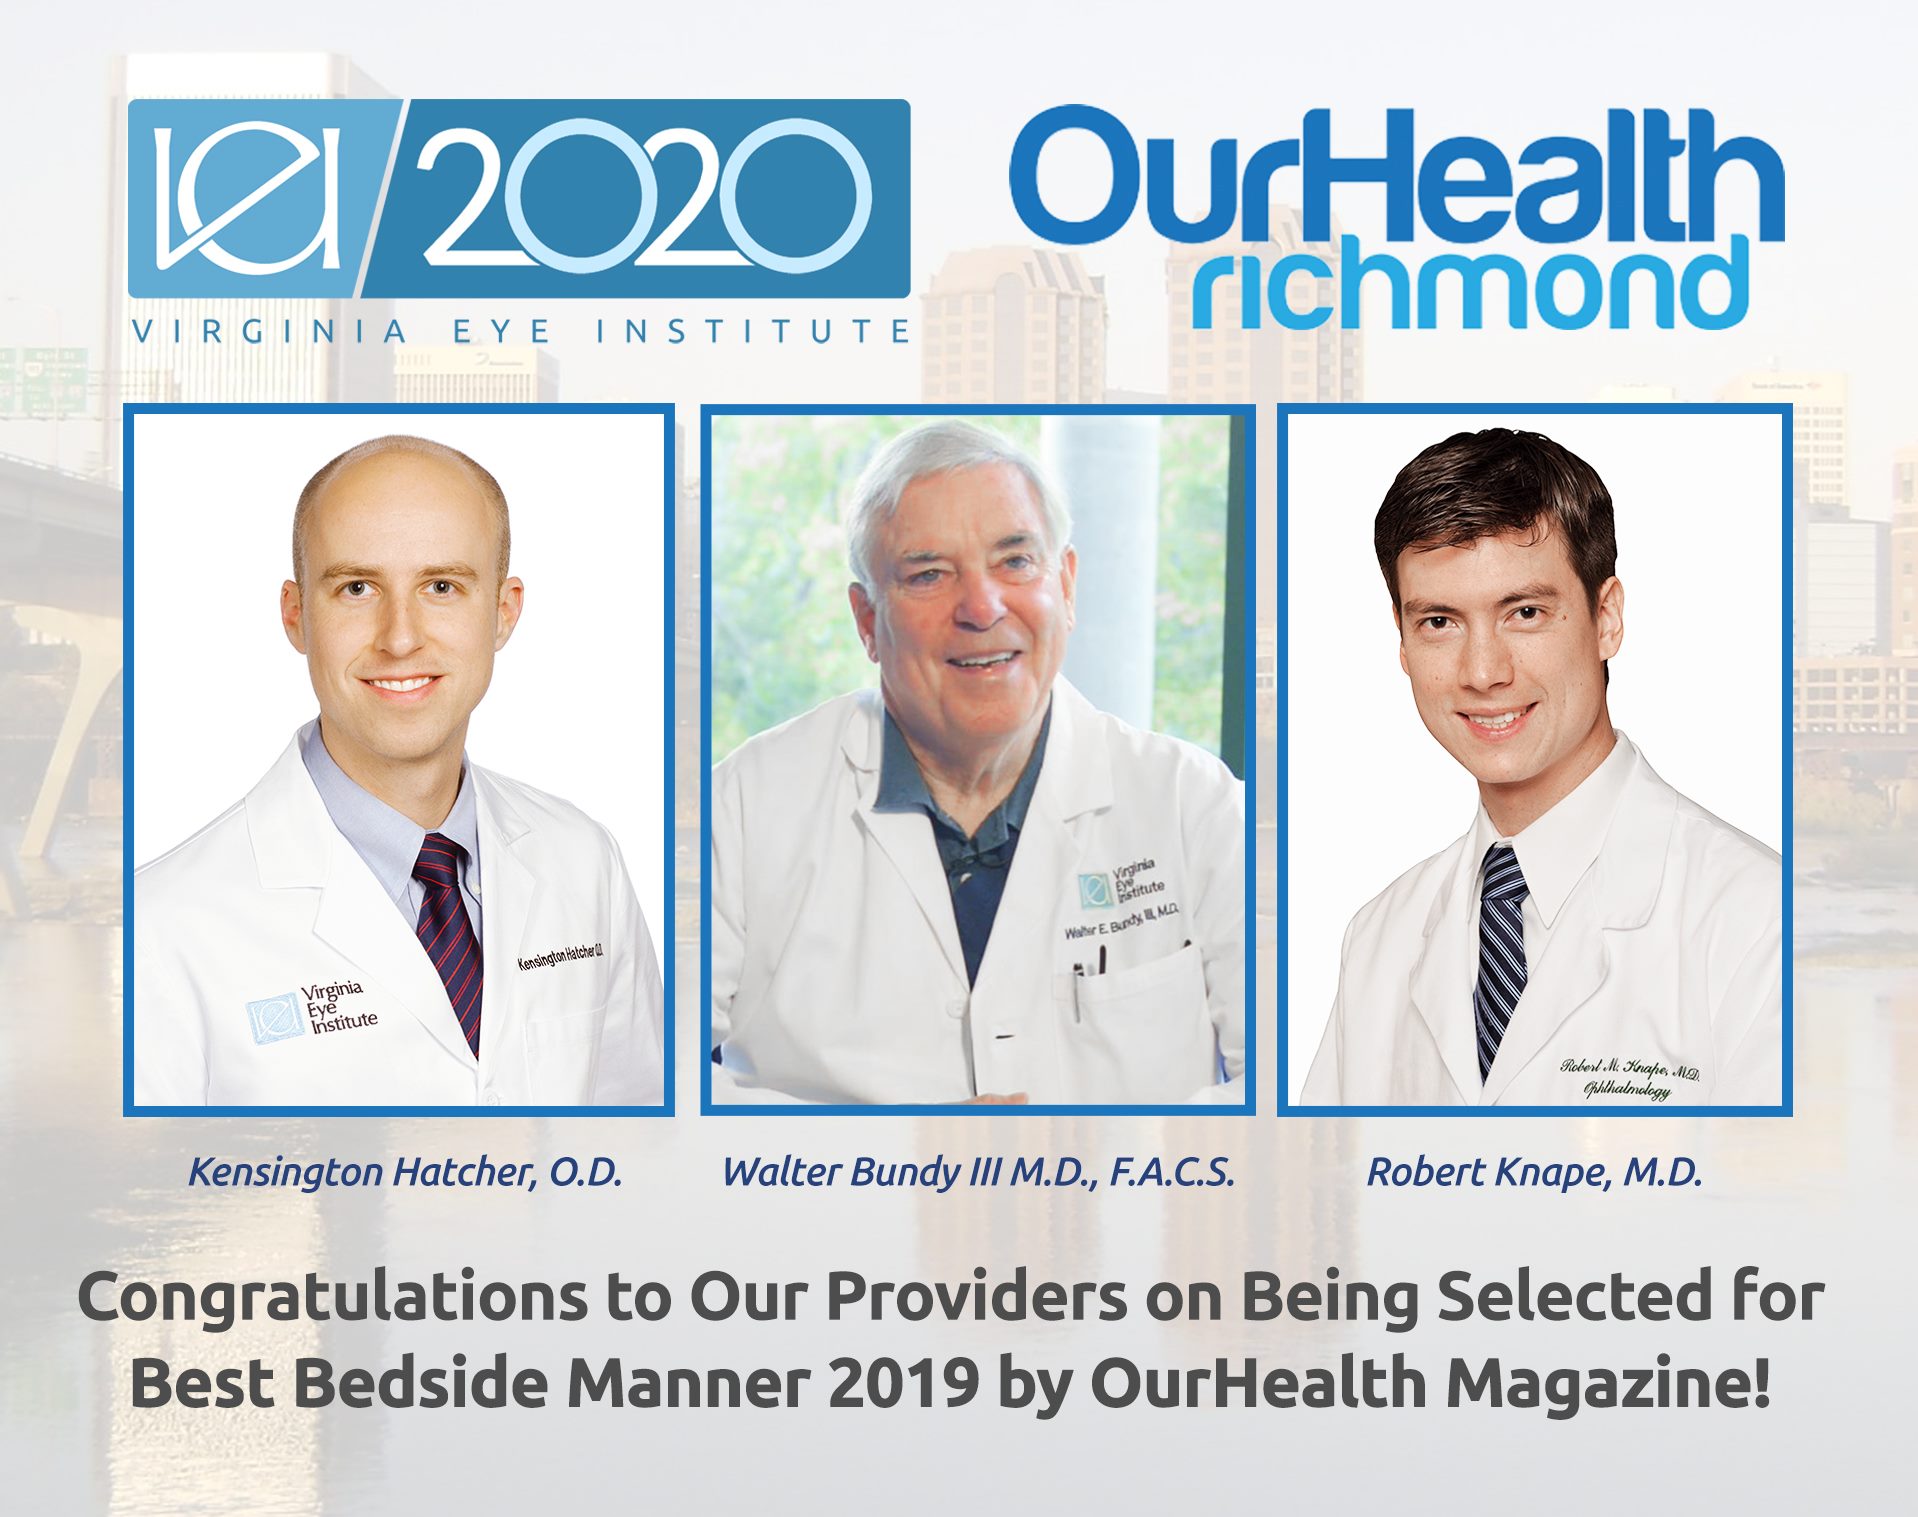 3 VEI providers were named for the best bedside manner award of 2019 for OurHealth